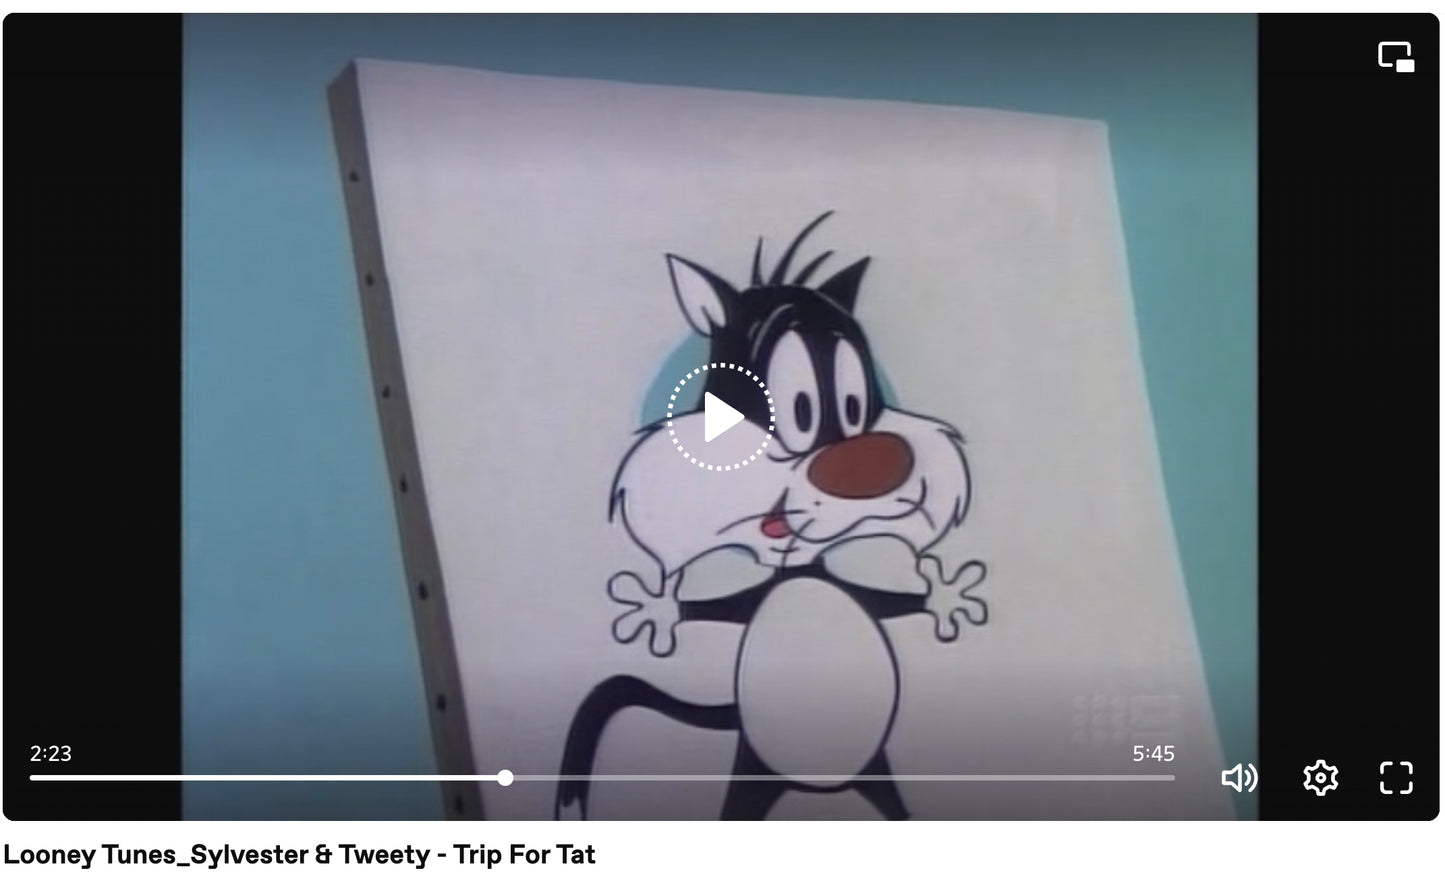 Looney Tunes 1960 Original Production Background from Warners Brothers Tweety and Sylvester Trip for Tat